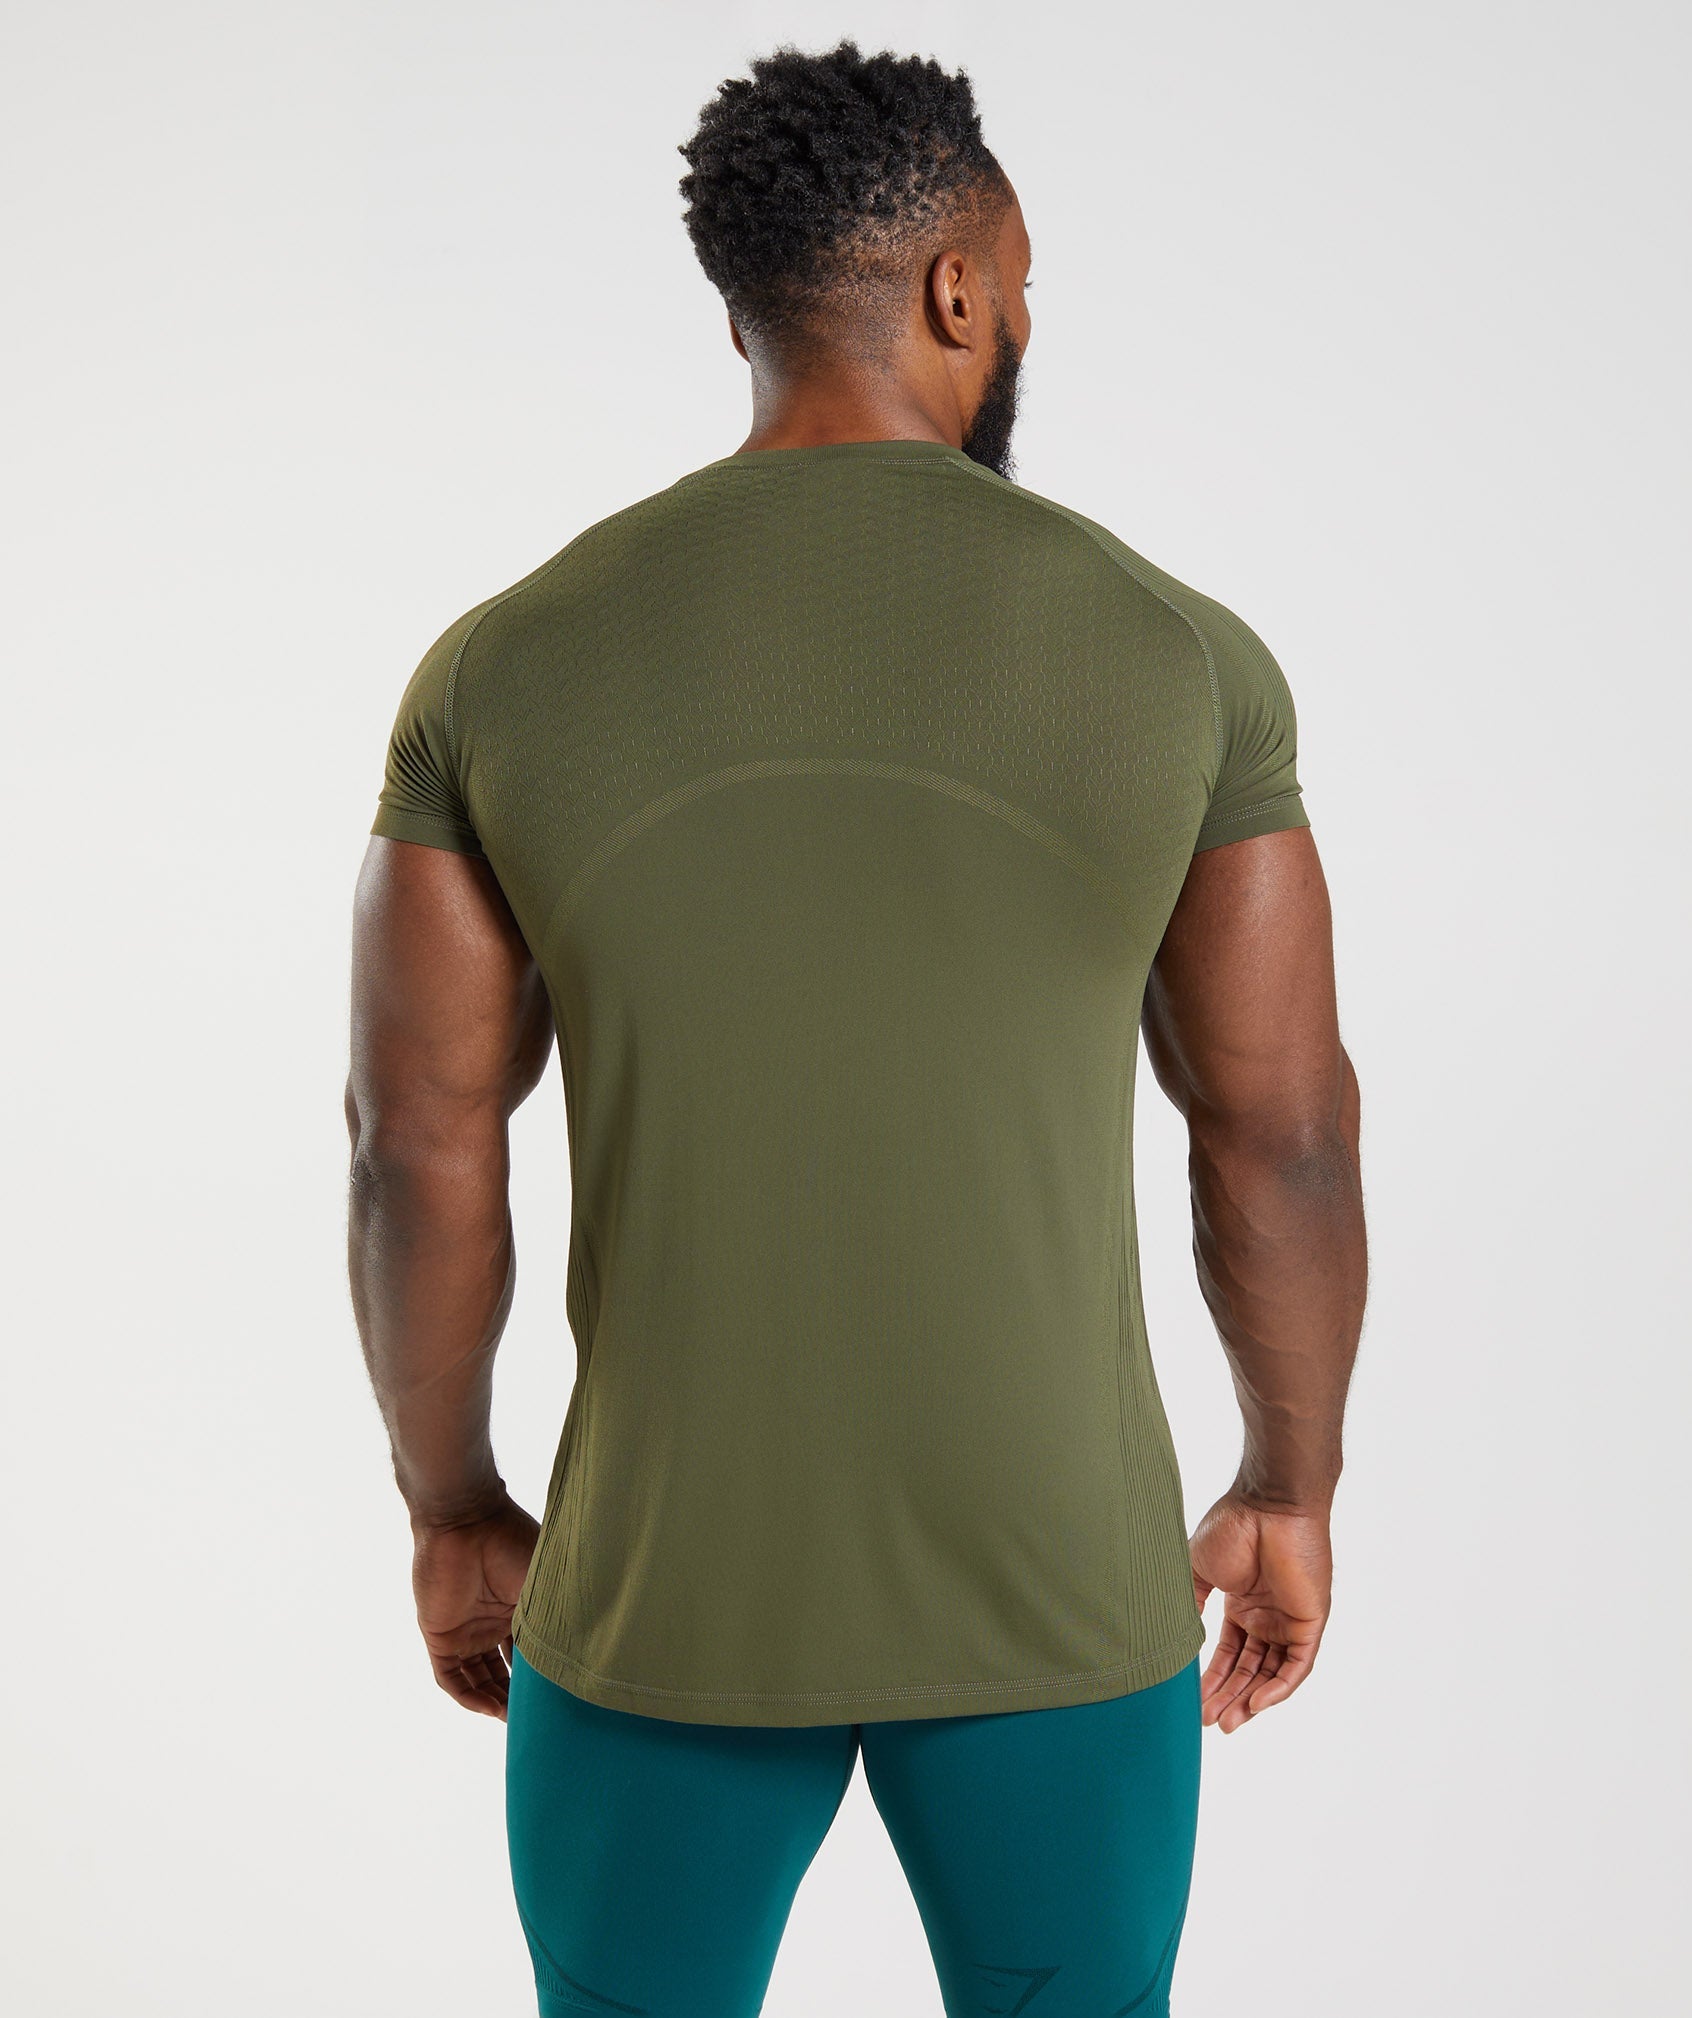 315 Seamless T-Shirt in Core Olive/Marsh Green - view 2